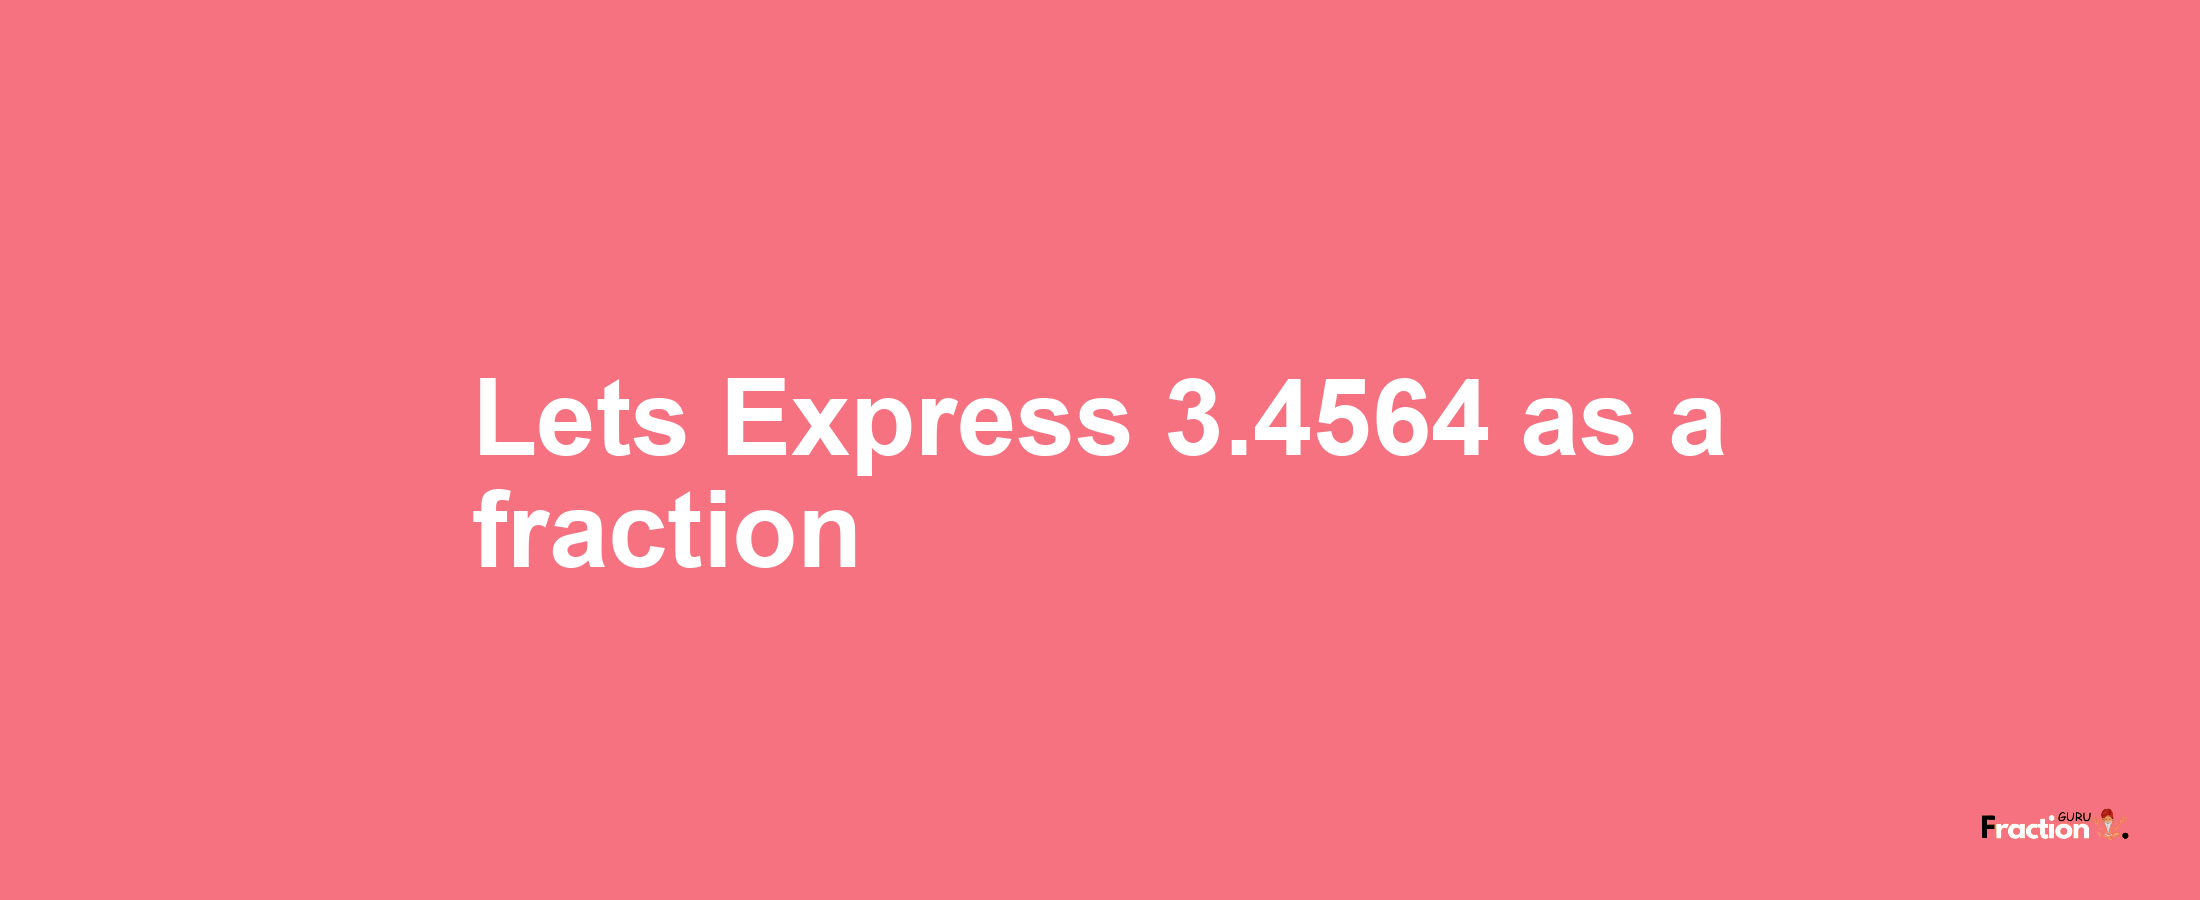 Lets Express 3.4564 as afraction